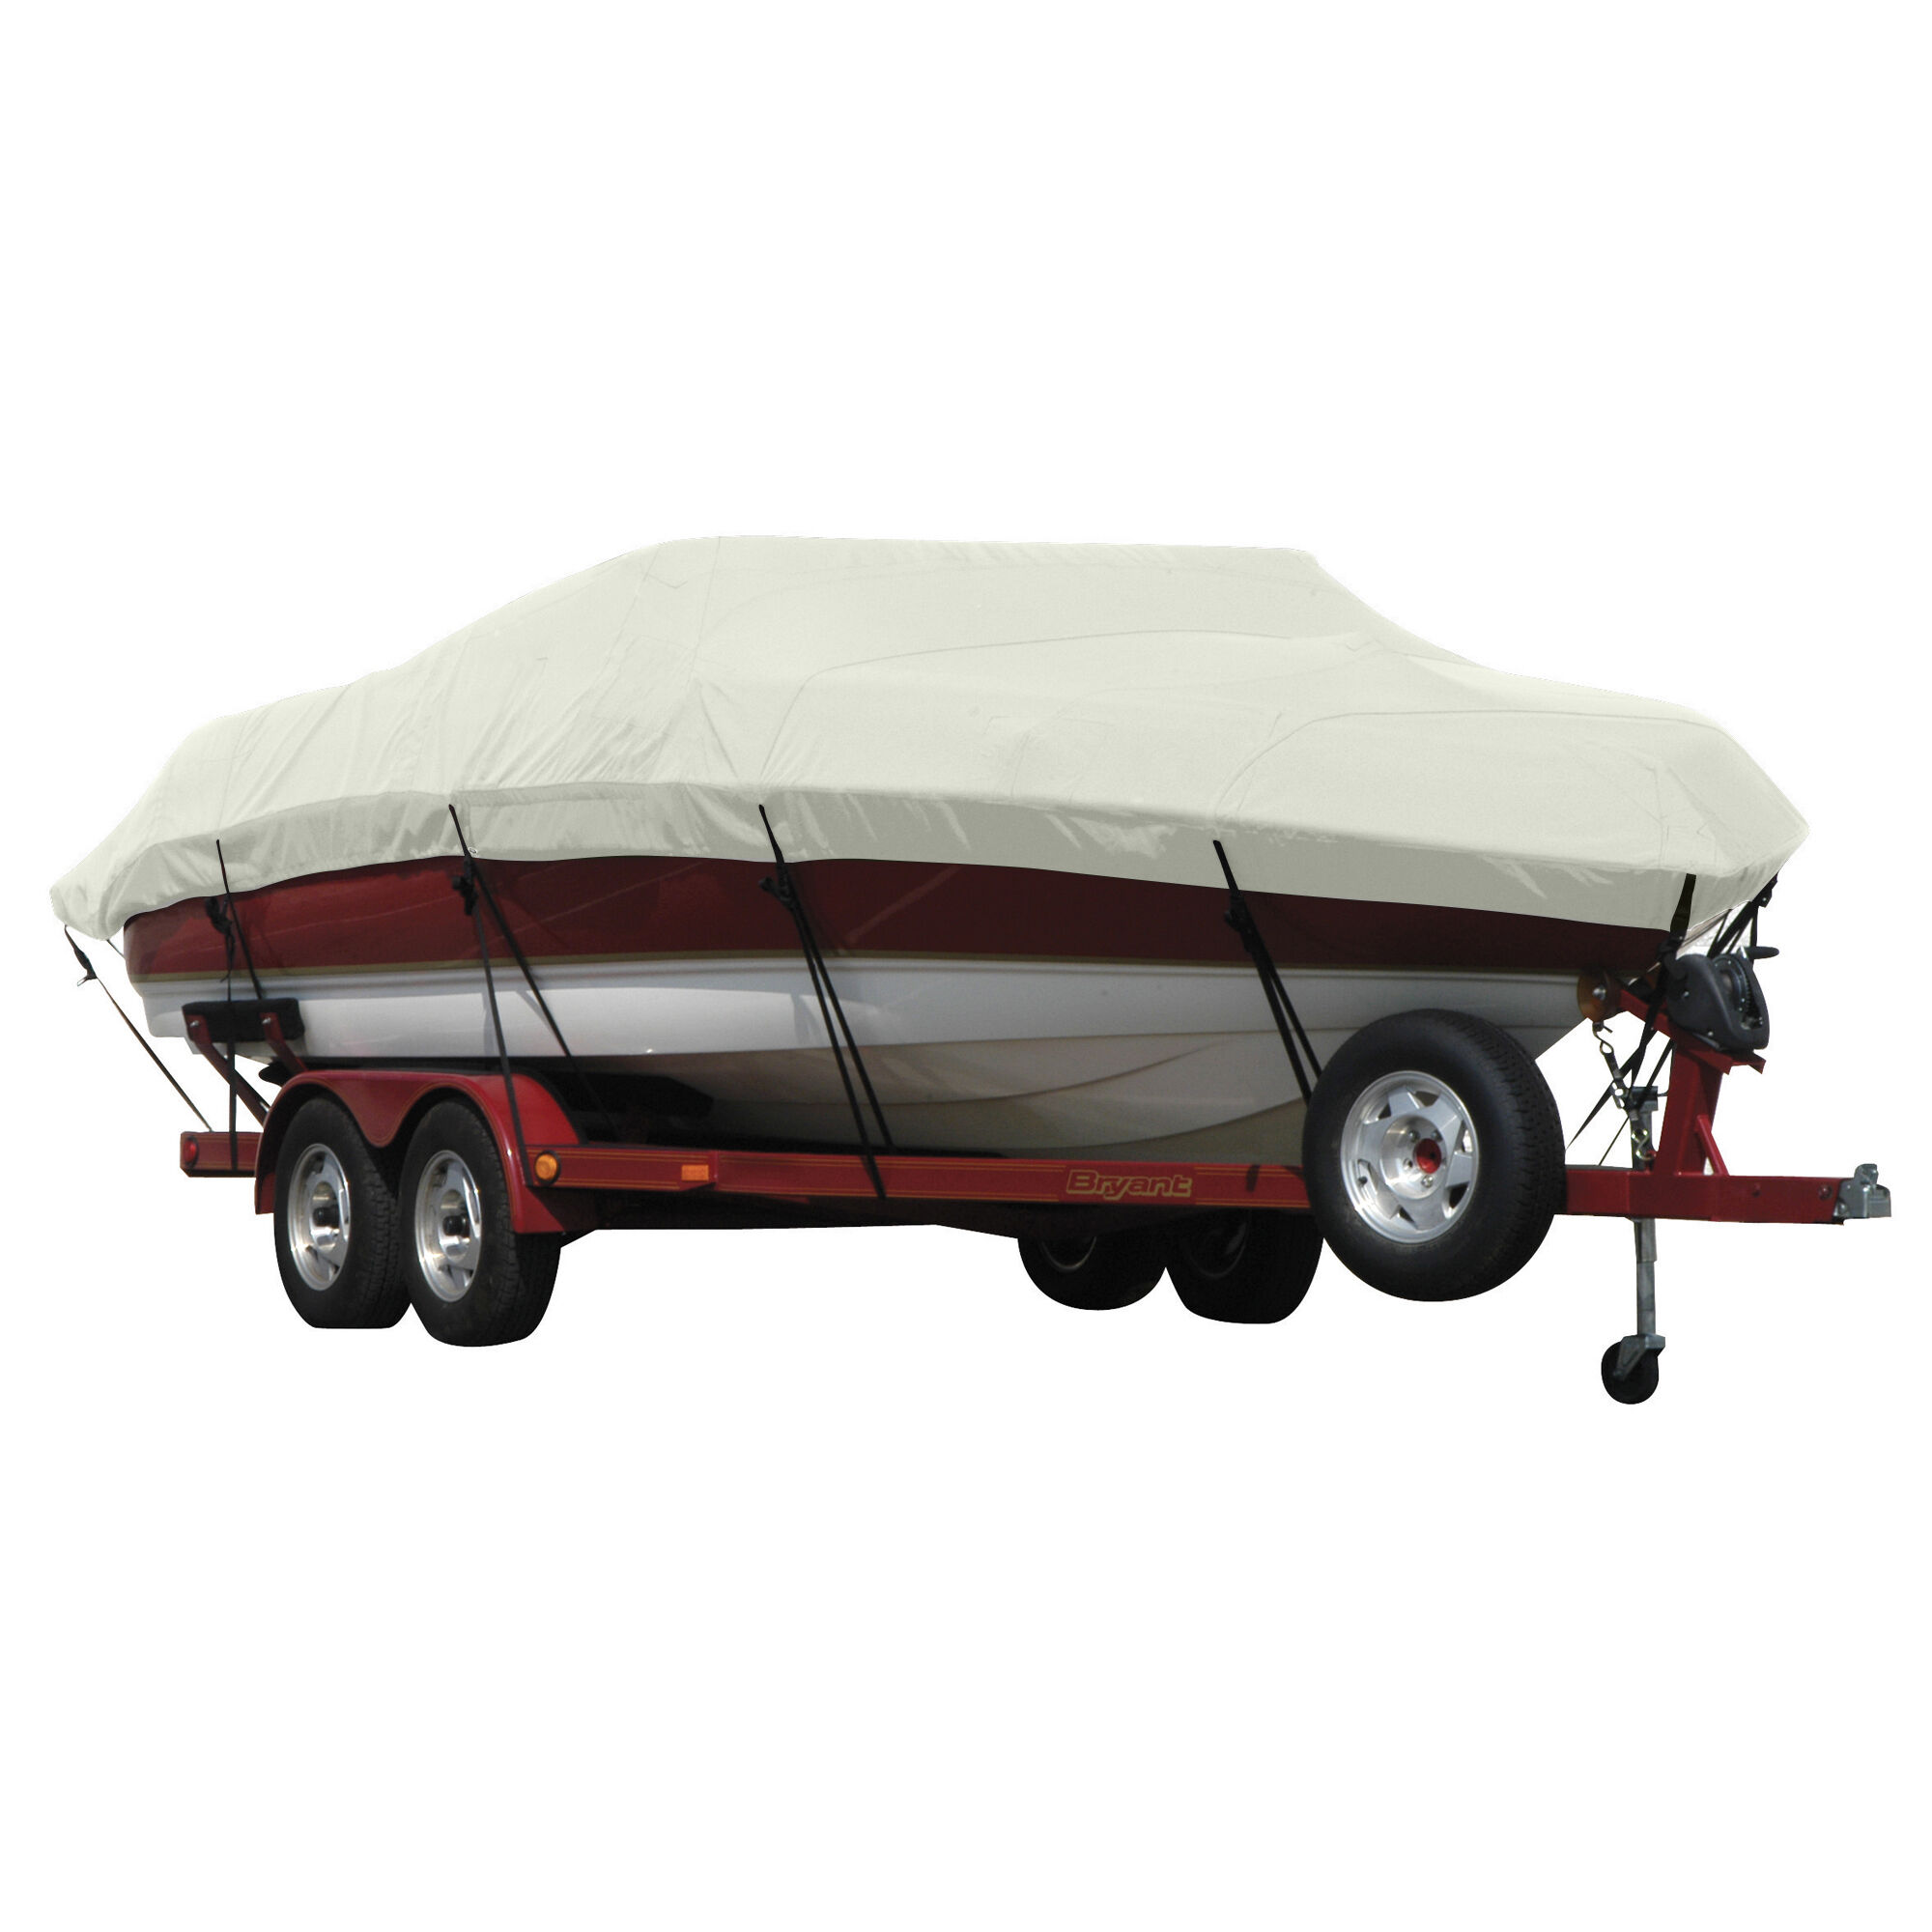 Covermate Exact Fit Sunbrella Boat Cover for Supreme V232 V232 w/ Skylon Tower Does Not Cover PLATFORMm I/O. Silver